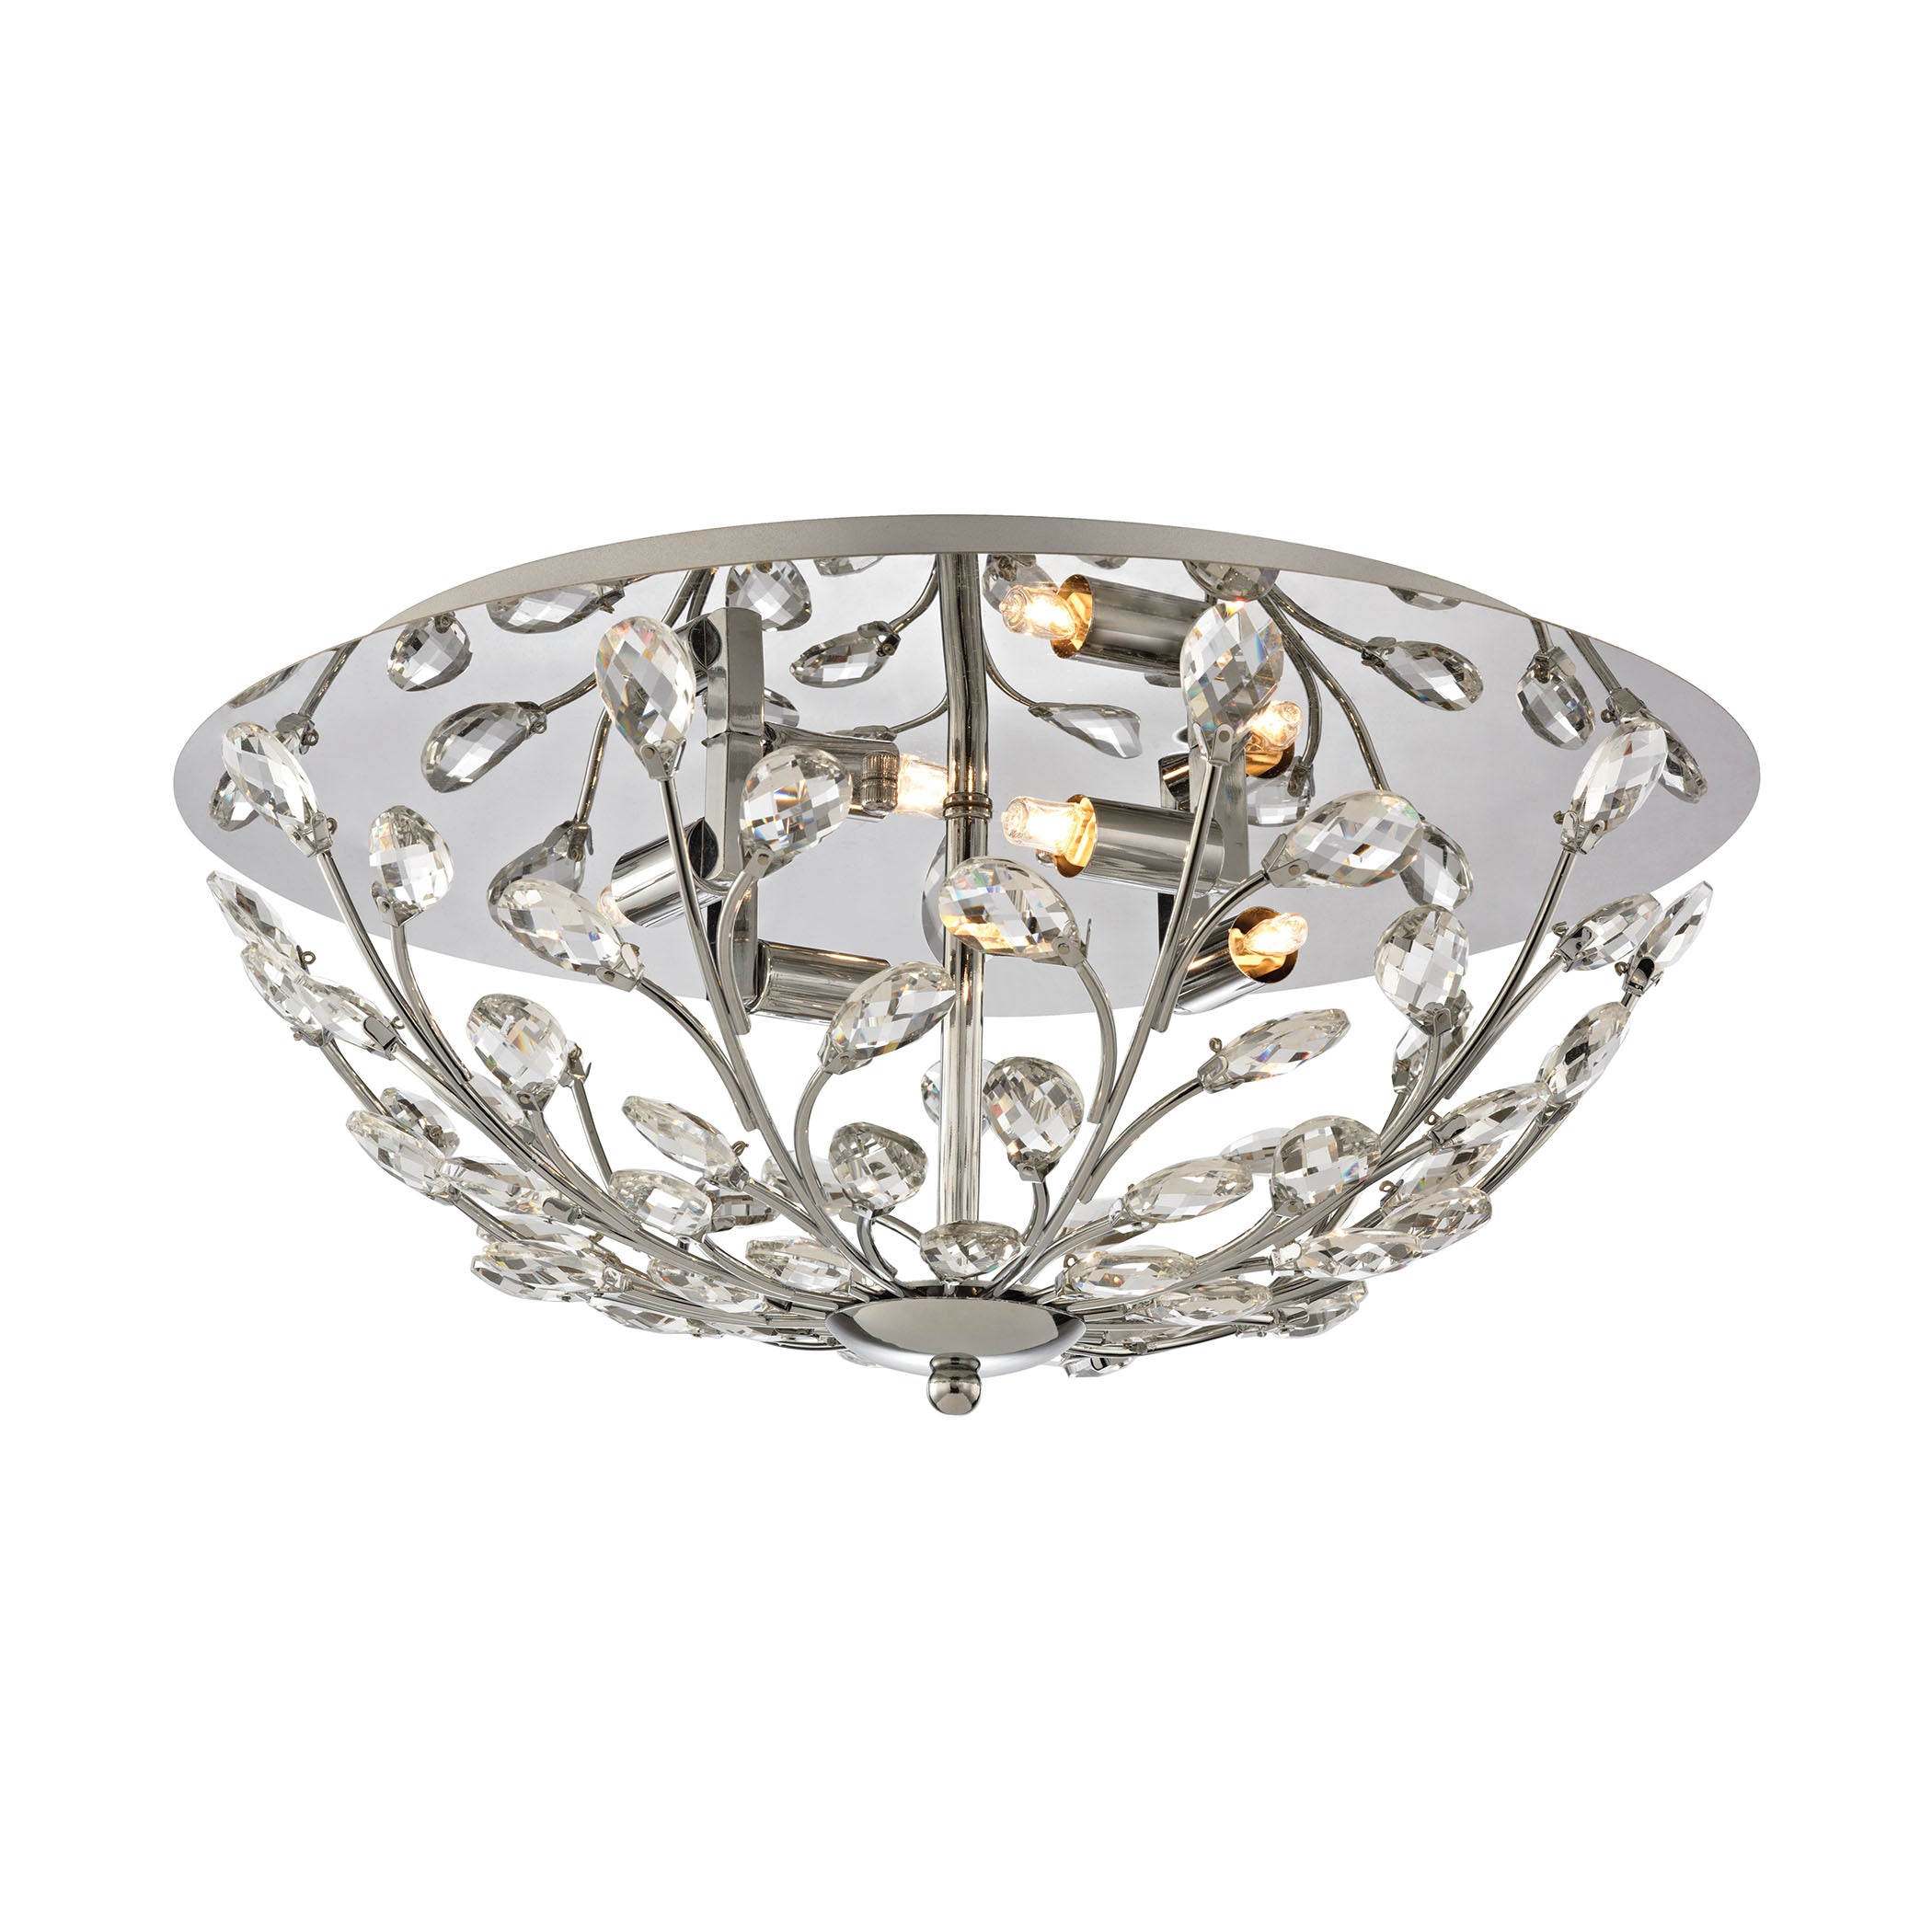 ELK Lighting 45261/4 Crystique 4-Light Flush Mount in Polished Chrome with Branch Metalwork and Clear Crystal